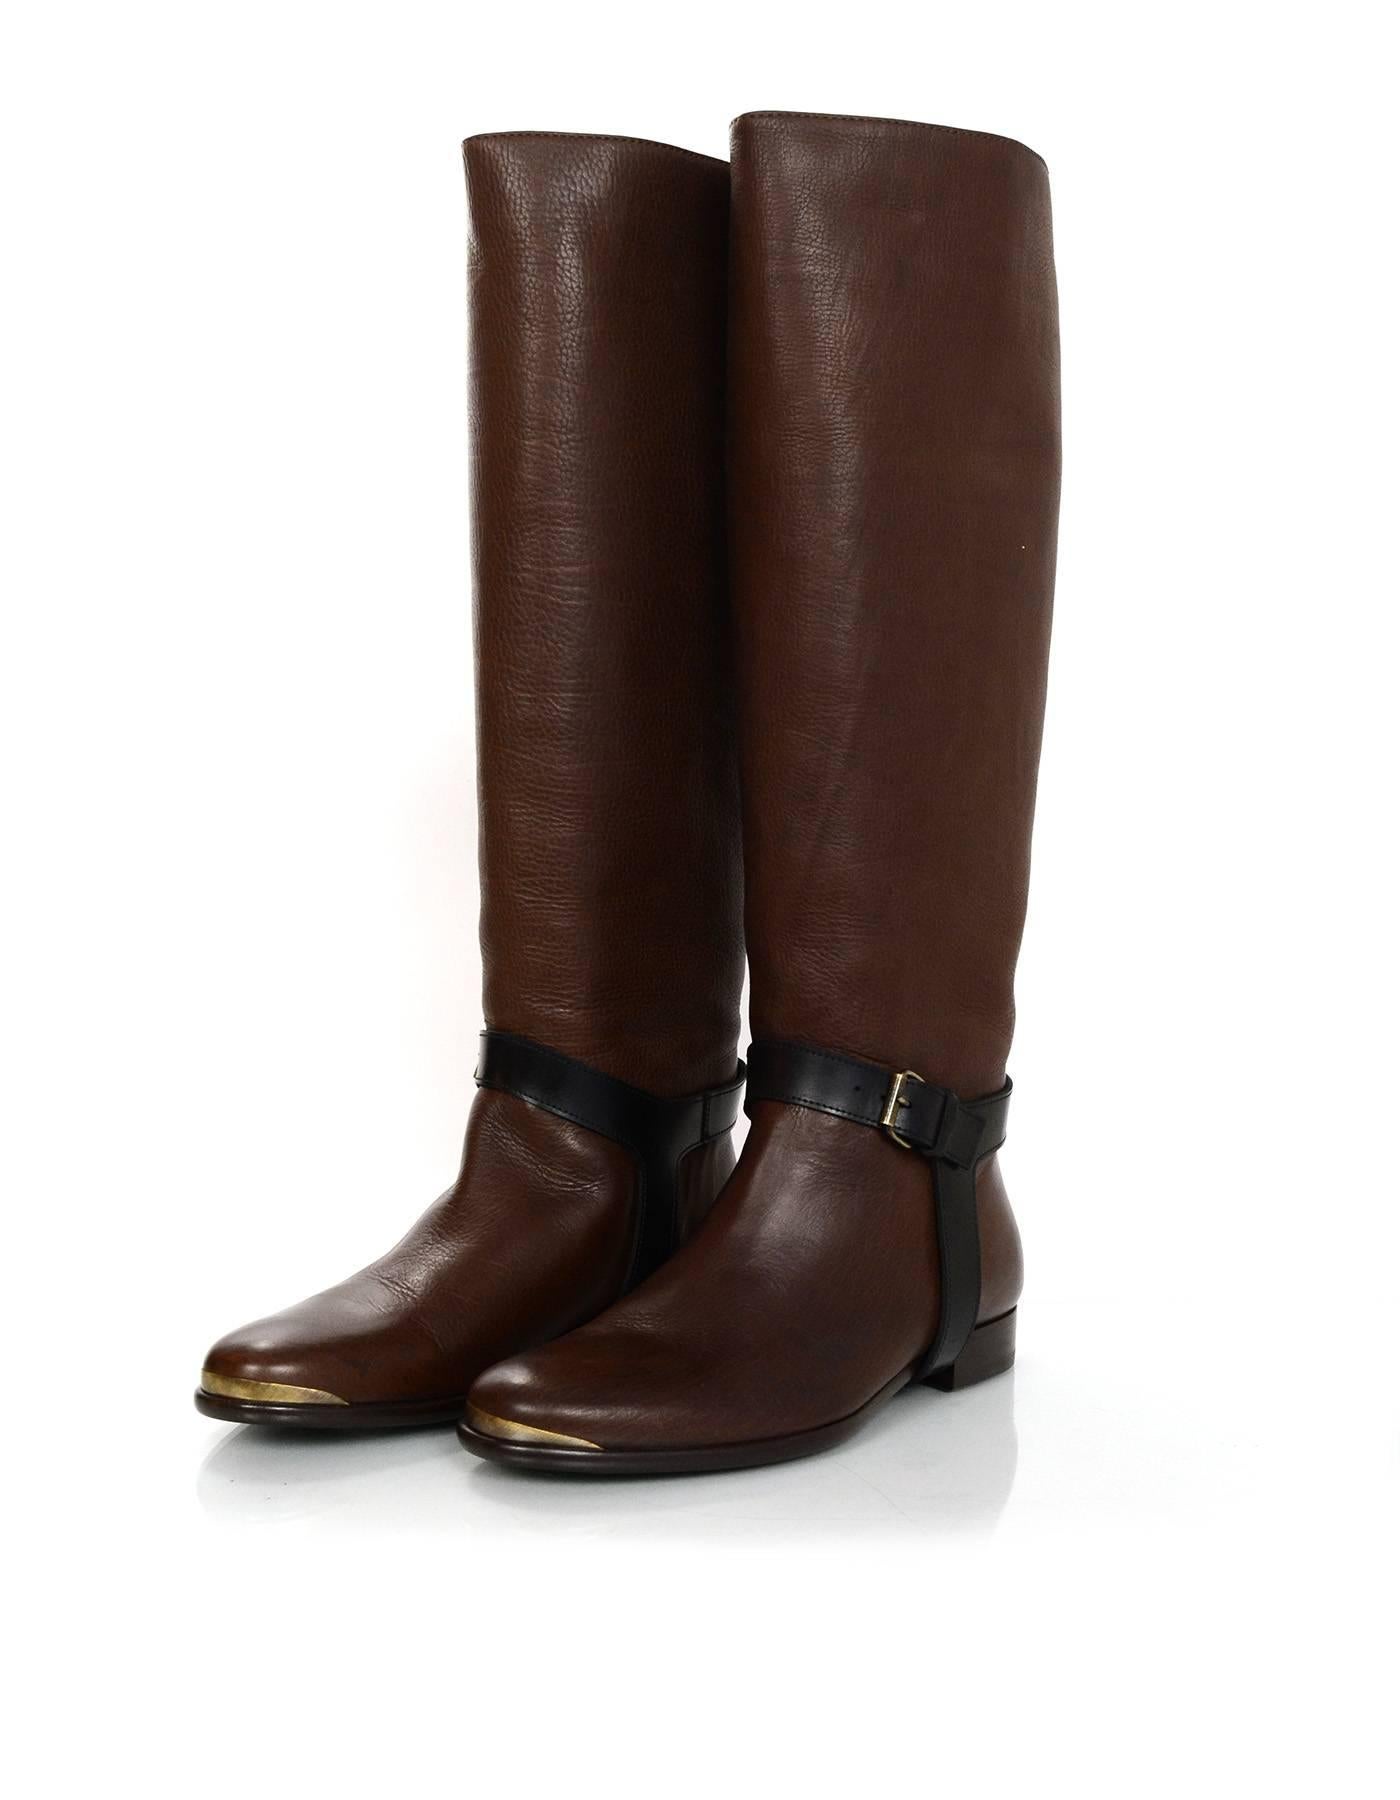 Lanvin Brown Riding Boots Sz 37 NIB
Features black stirrups

Made In: Italy
Color: Brown, black
Materials: Leather
Closure/Opening: Pull-on
Sole Stamp: Lanvin 37 made in italy
Overall Condition: Excellent pre-owned - no signs of wear
Included: